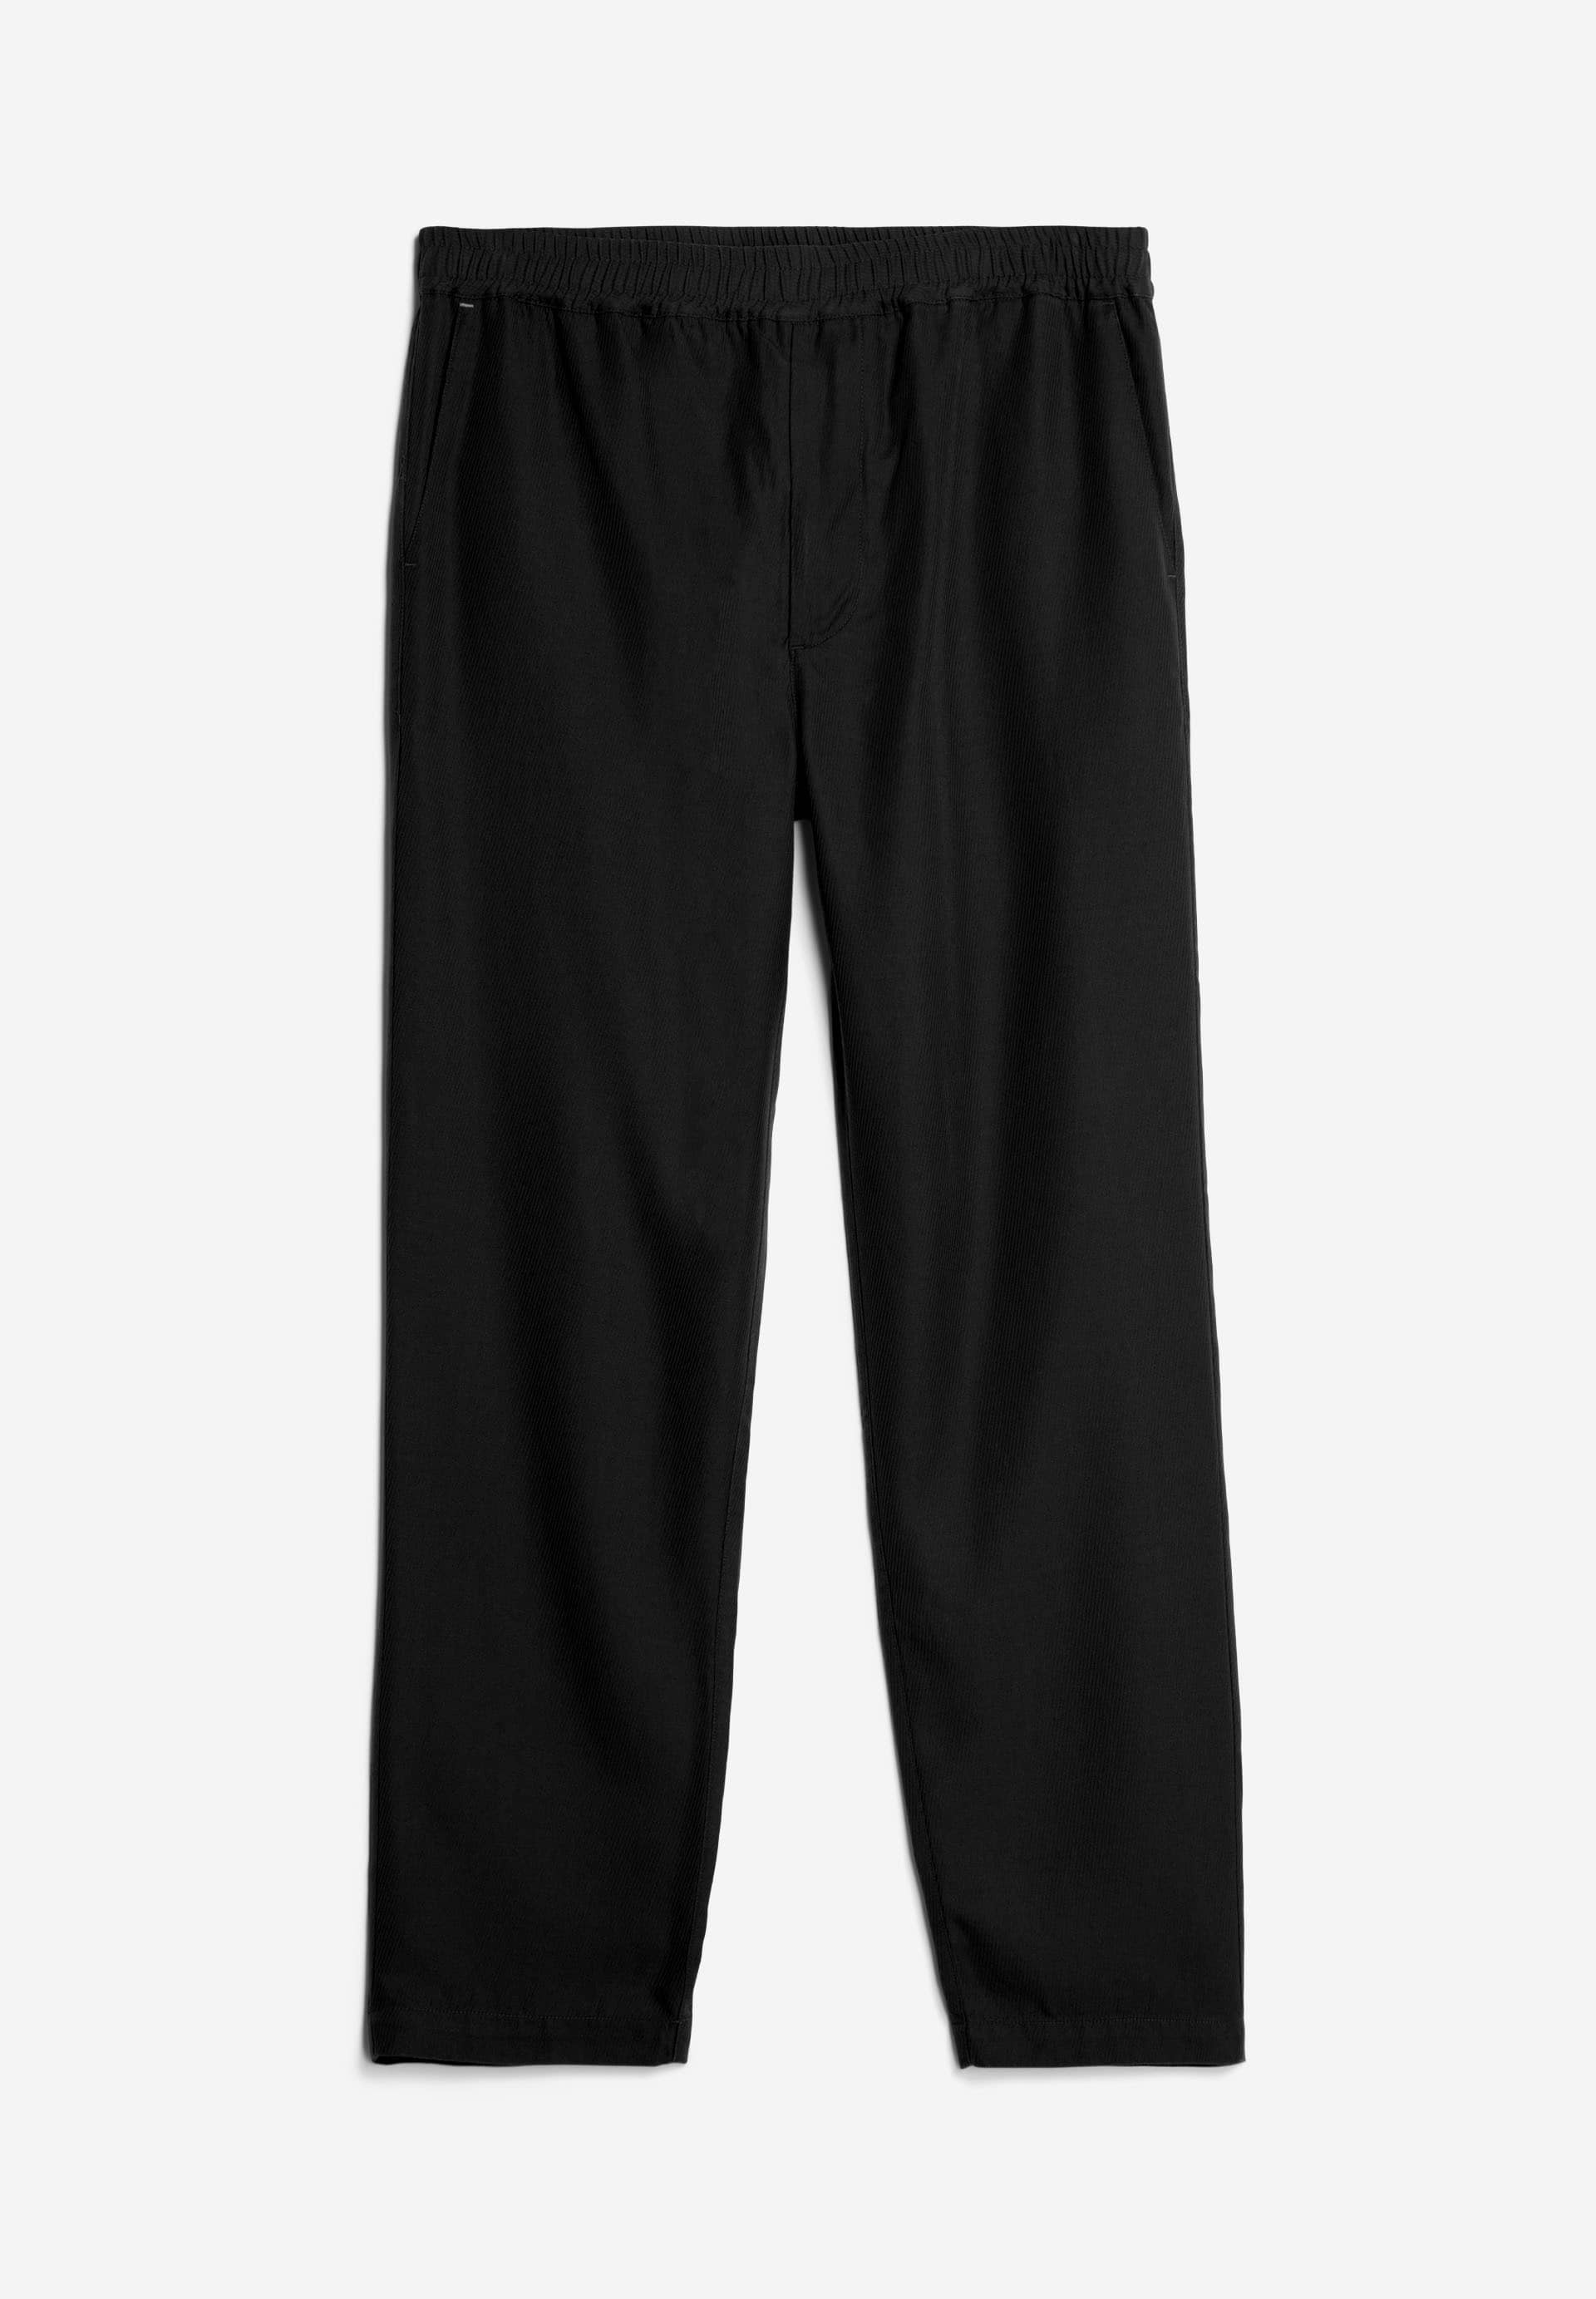 SKOGAA Pants Tapered Fit made of TENCEL™ Lyocell